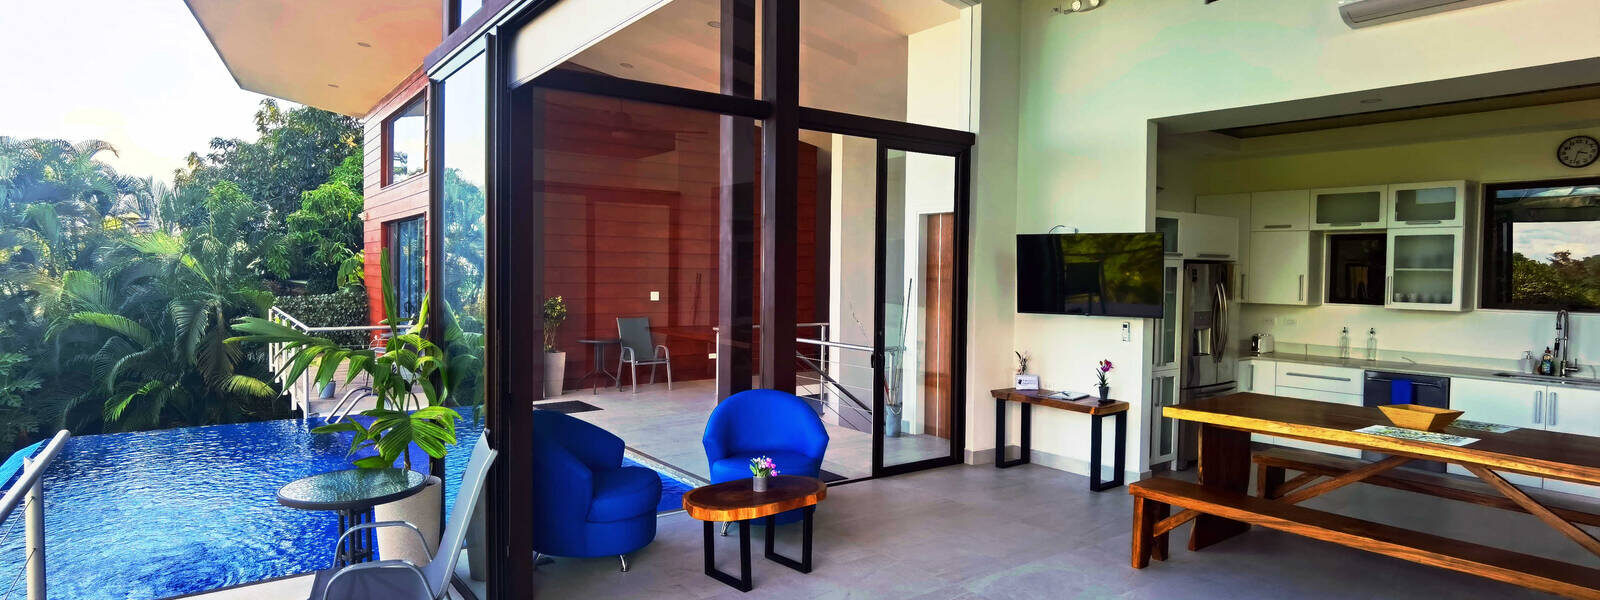 Huge sliding glass doors create an open-air living space where the outside is invited in.